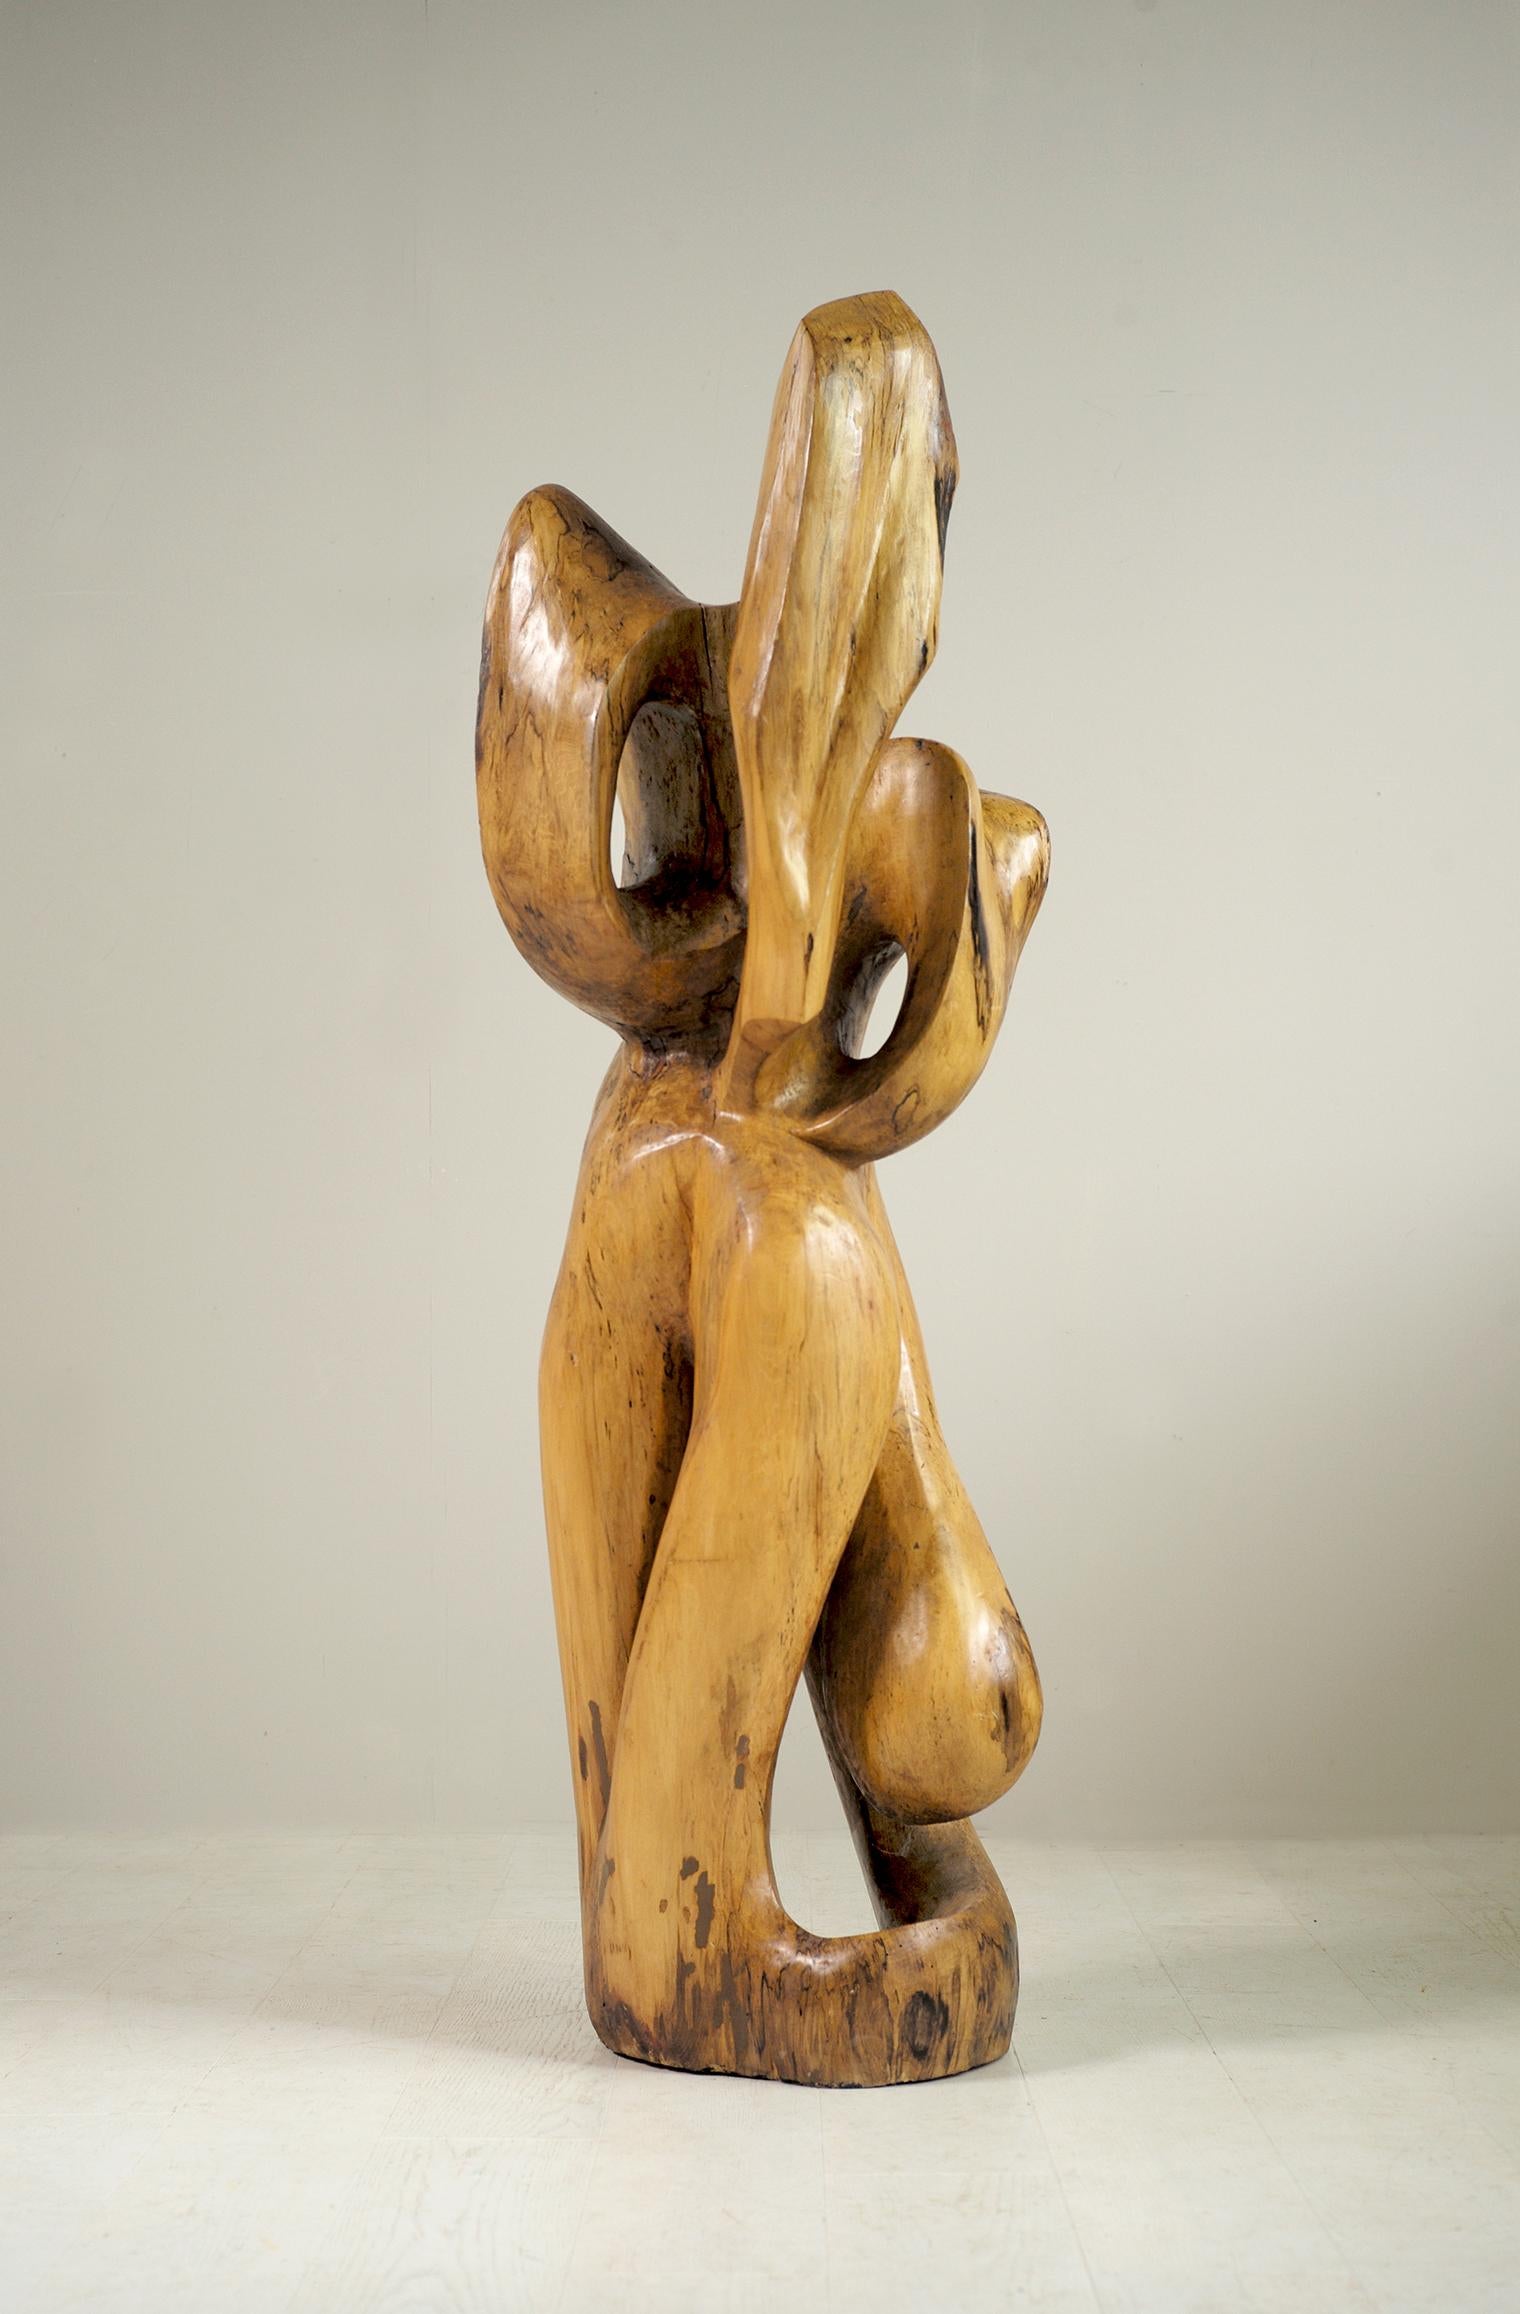 Important monoxyl sculpture in sycamore representing a couple, the man is prostrate, arms on the ground, the woman stands up.
Unique piece, circa 1960.
Measures: Height 160 cm.